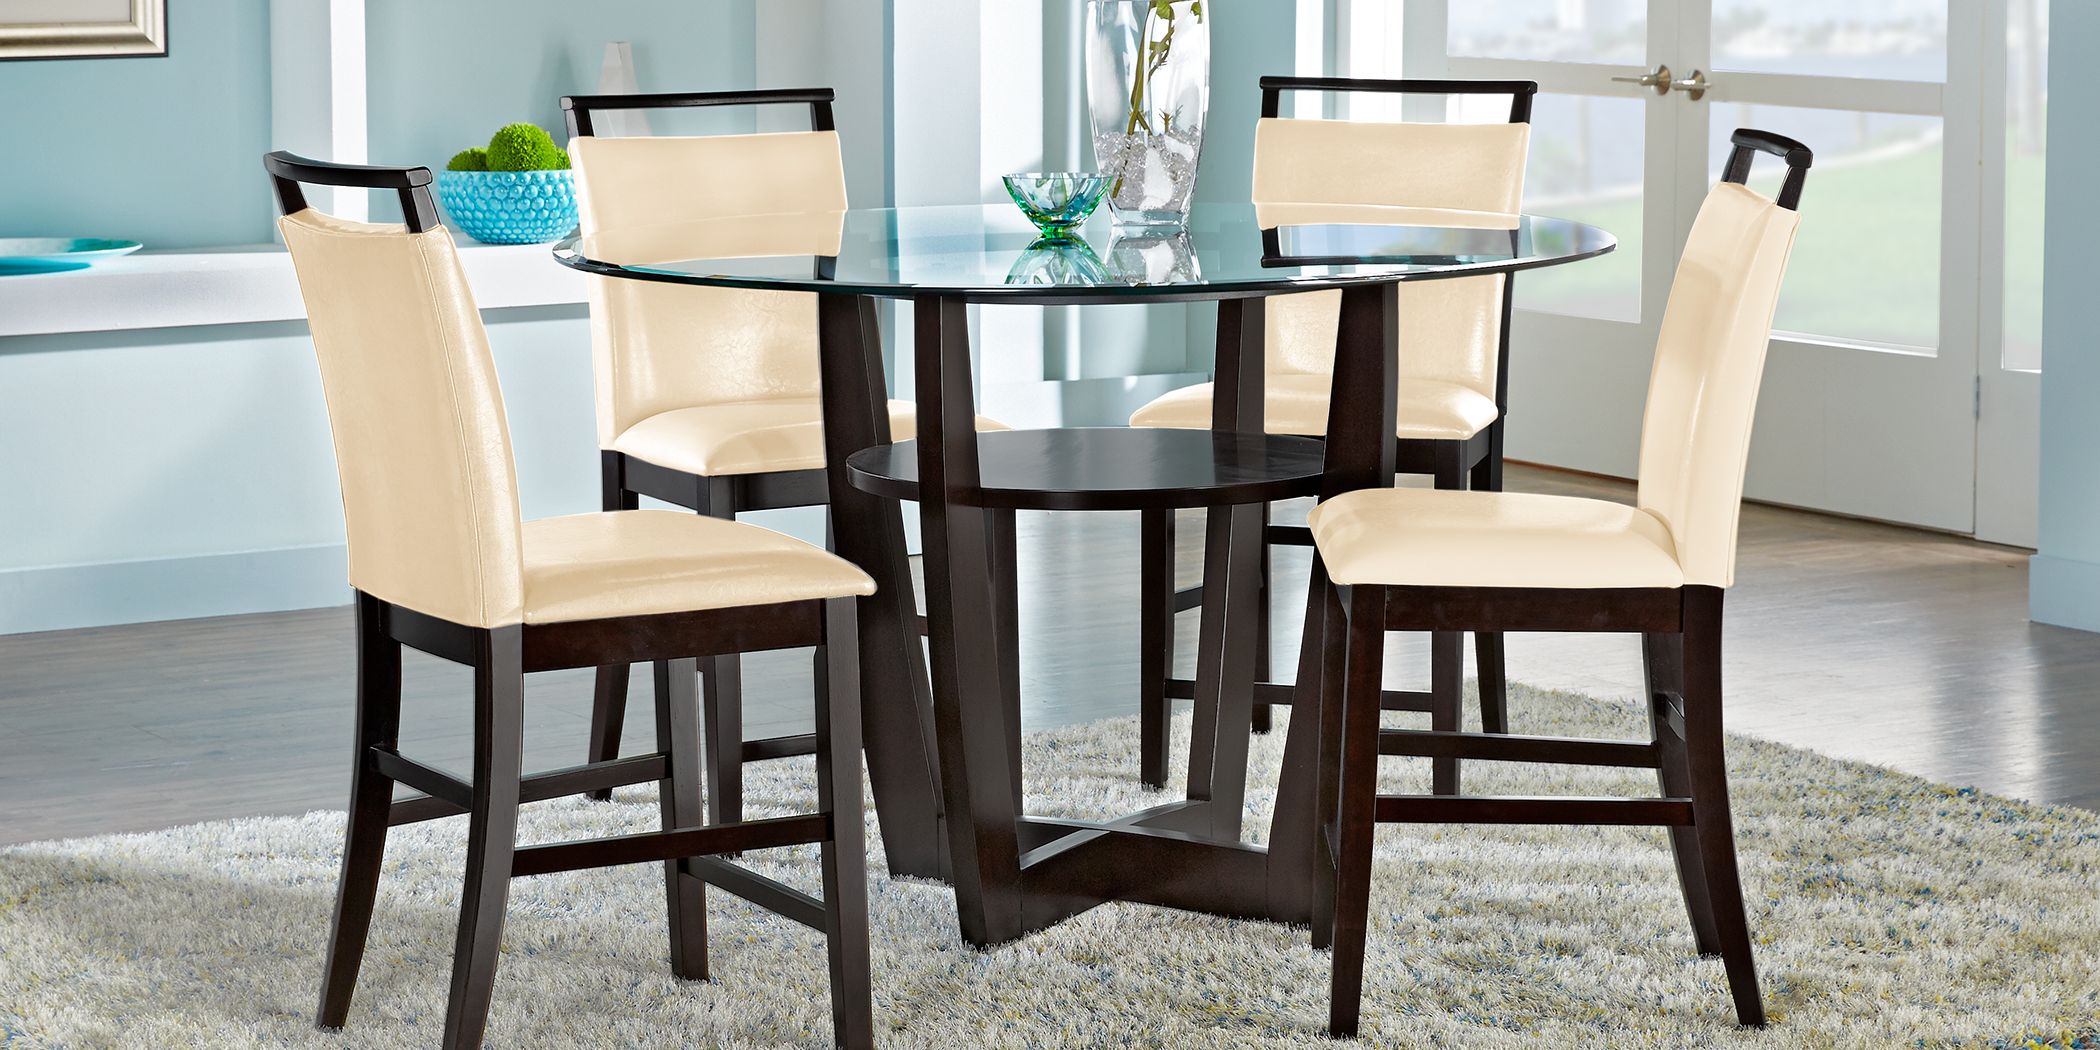 Glass Top Dining Room Table Sets For, High Top Dining Room Table Sets